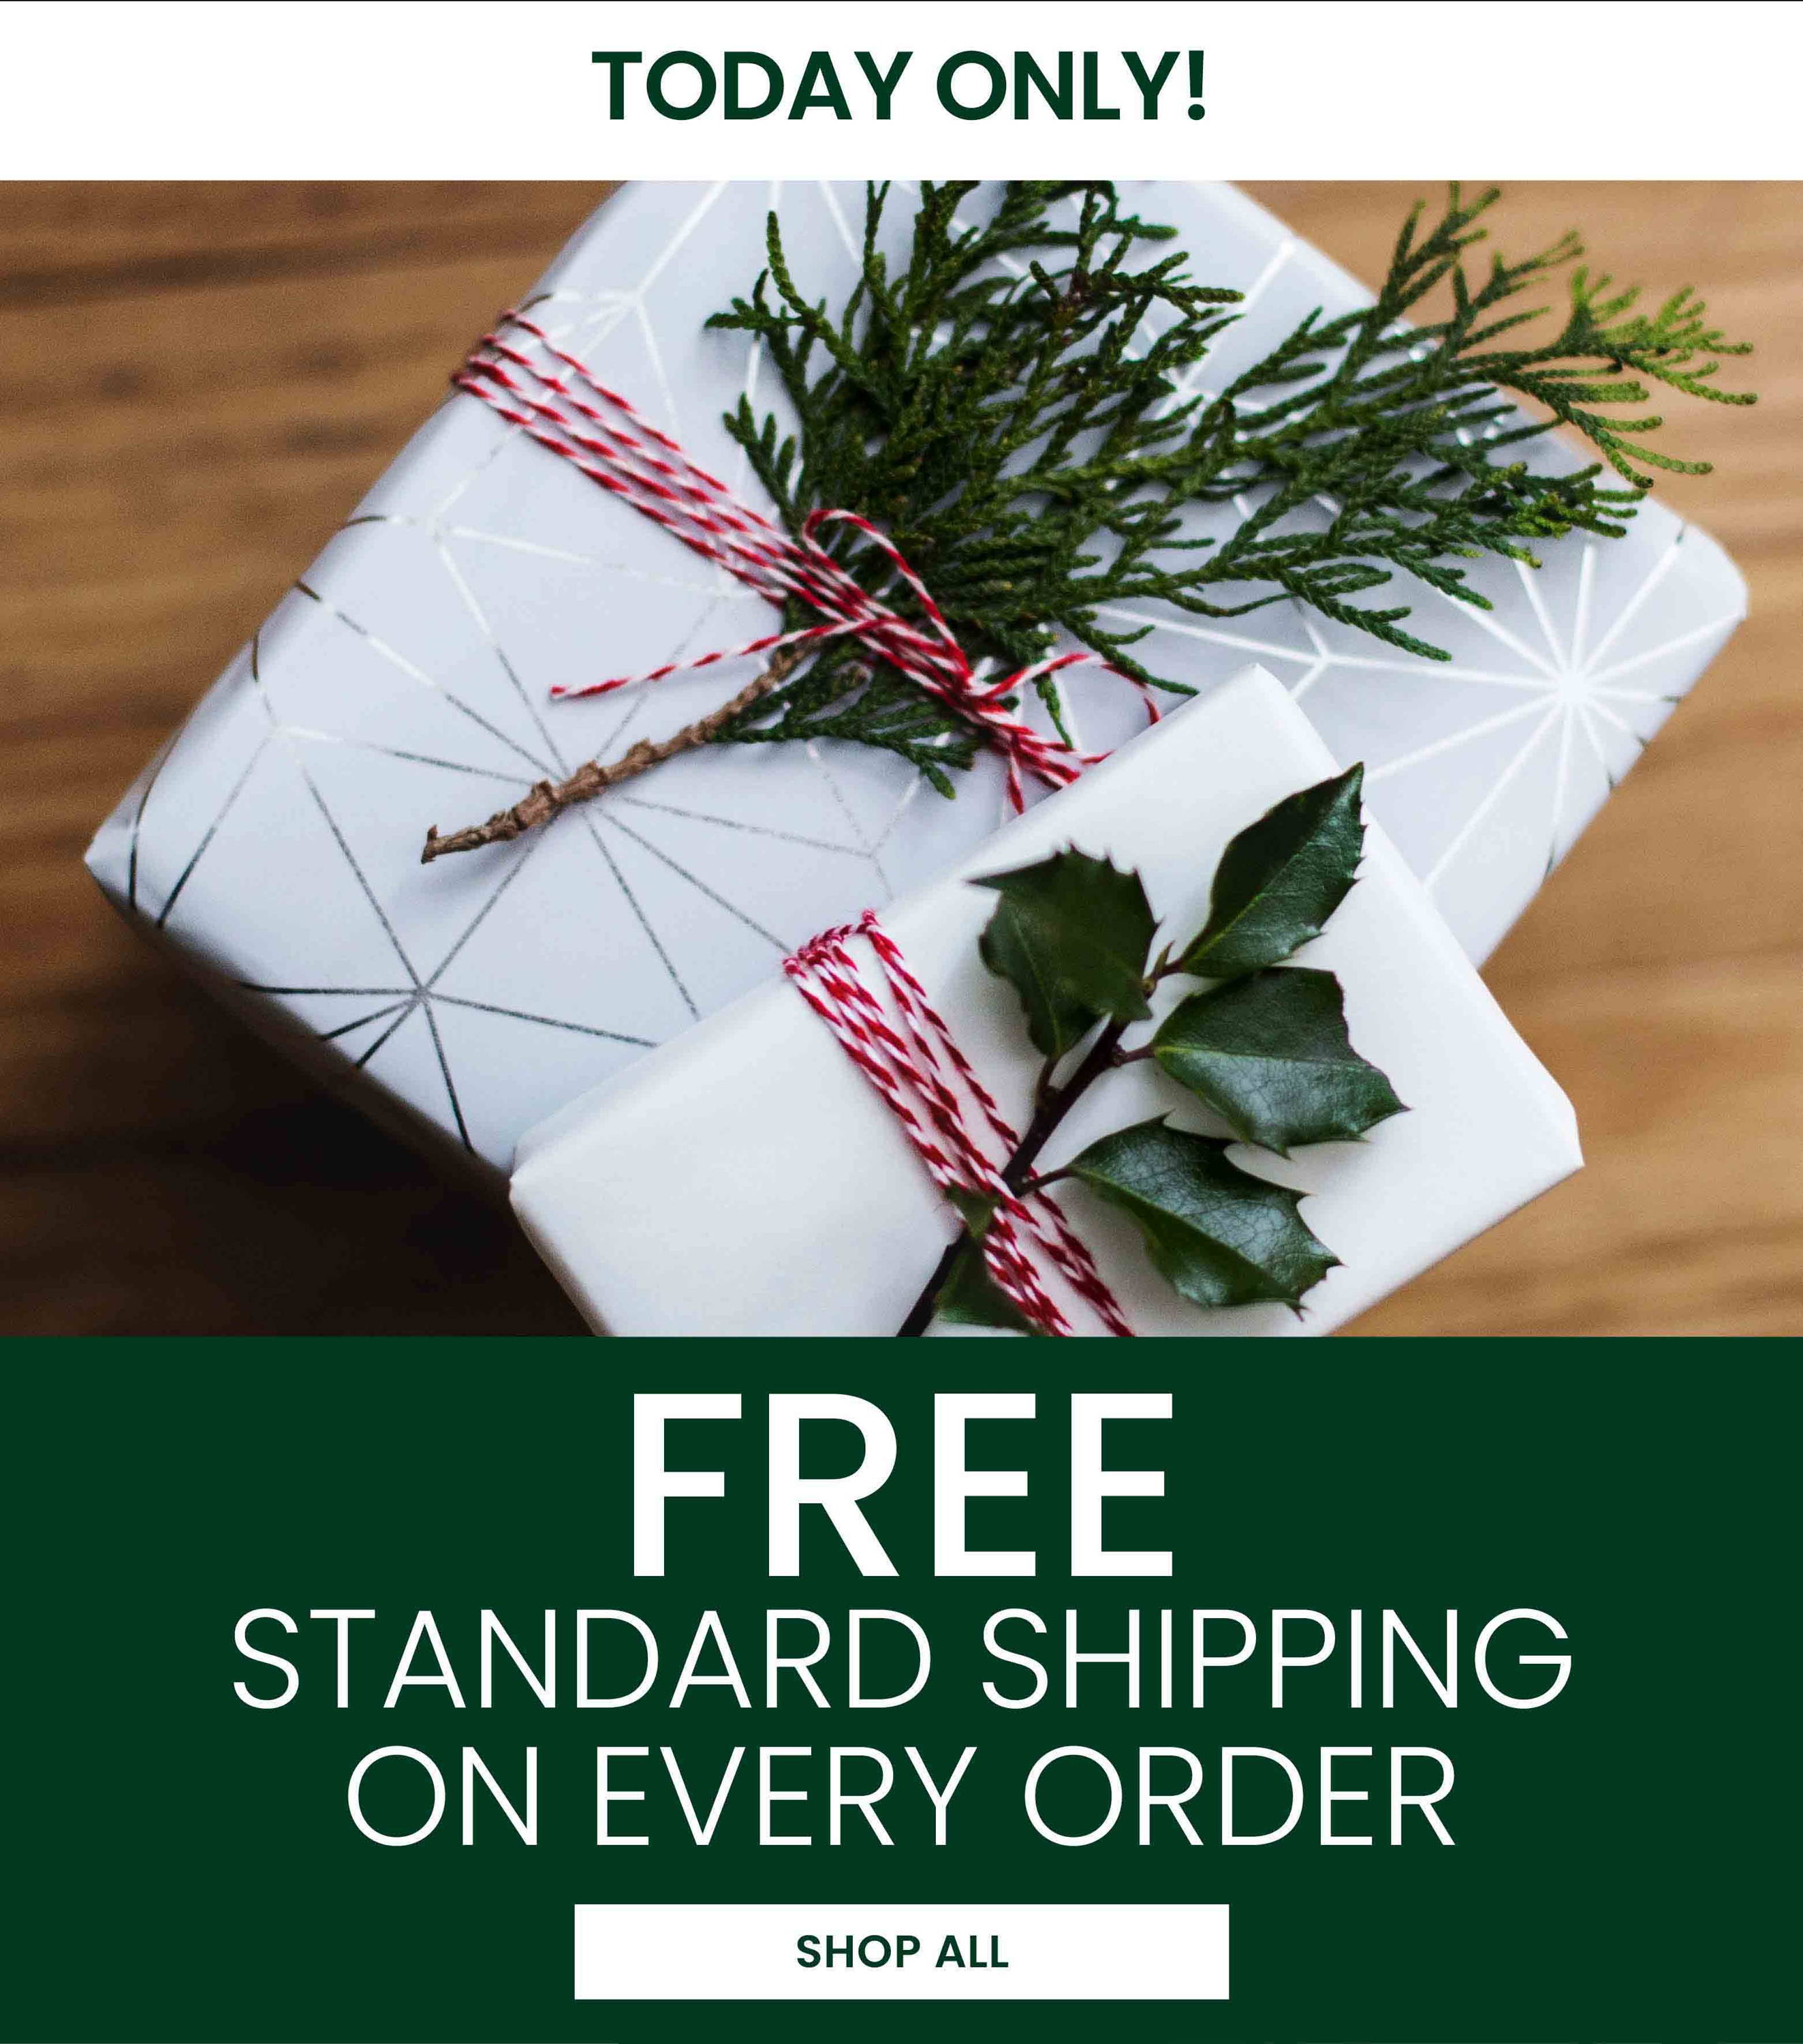 Today Only! Free Standard Shipping on Every Order.